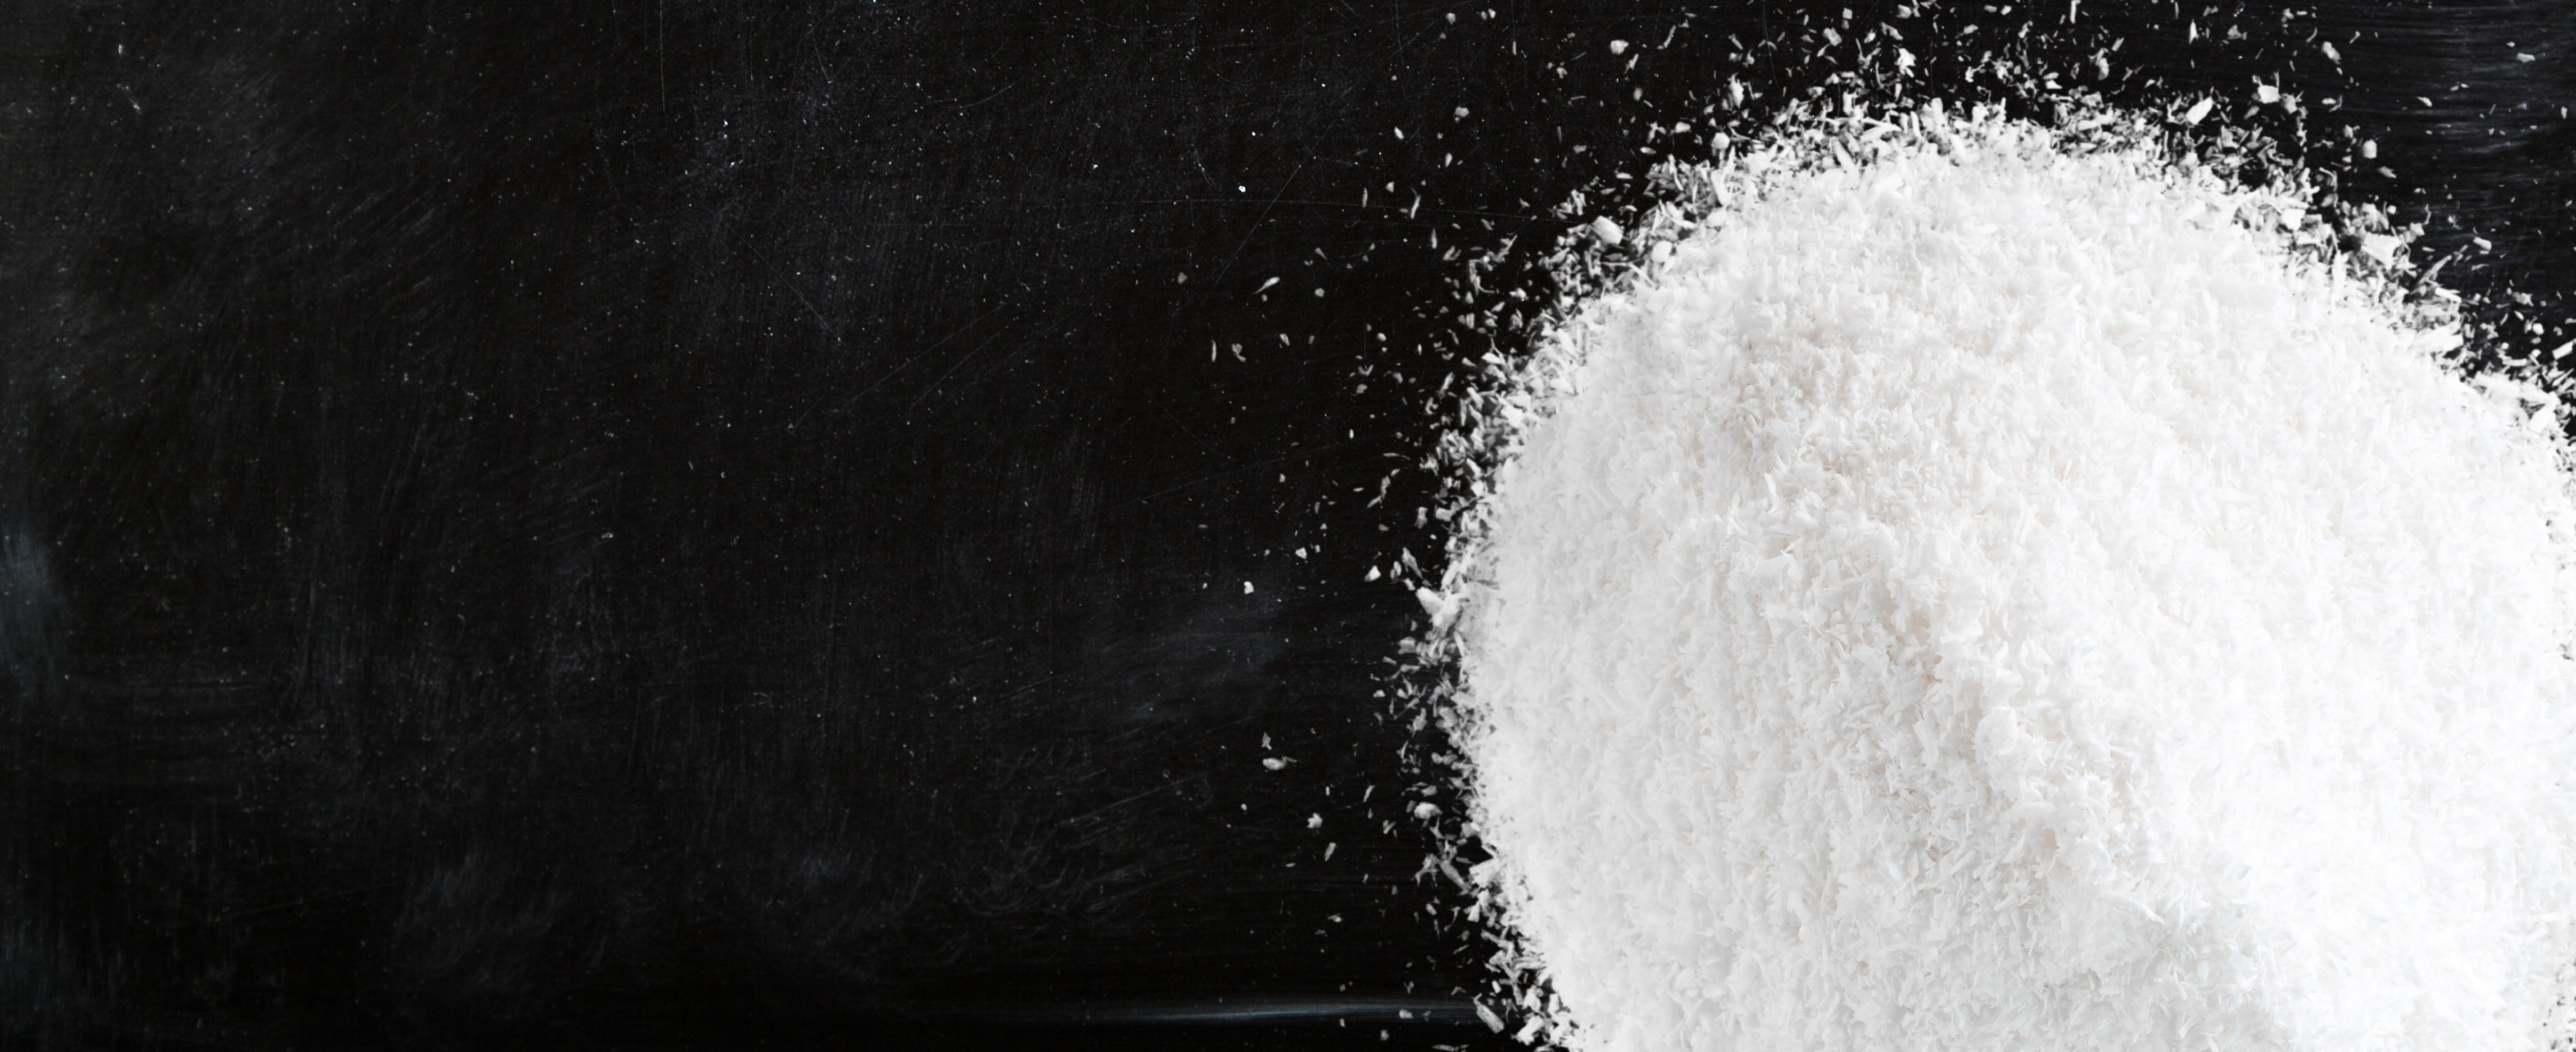 In the news – Titanium Dioxide Safety Update - Center for Research